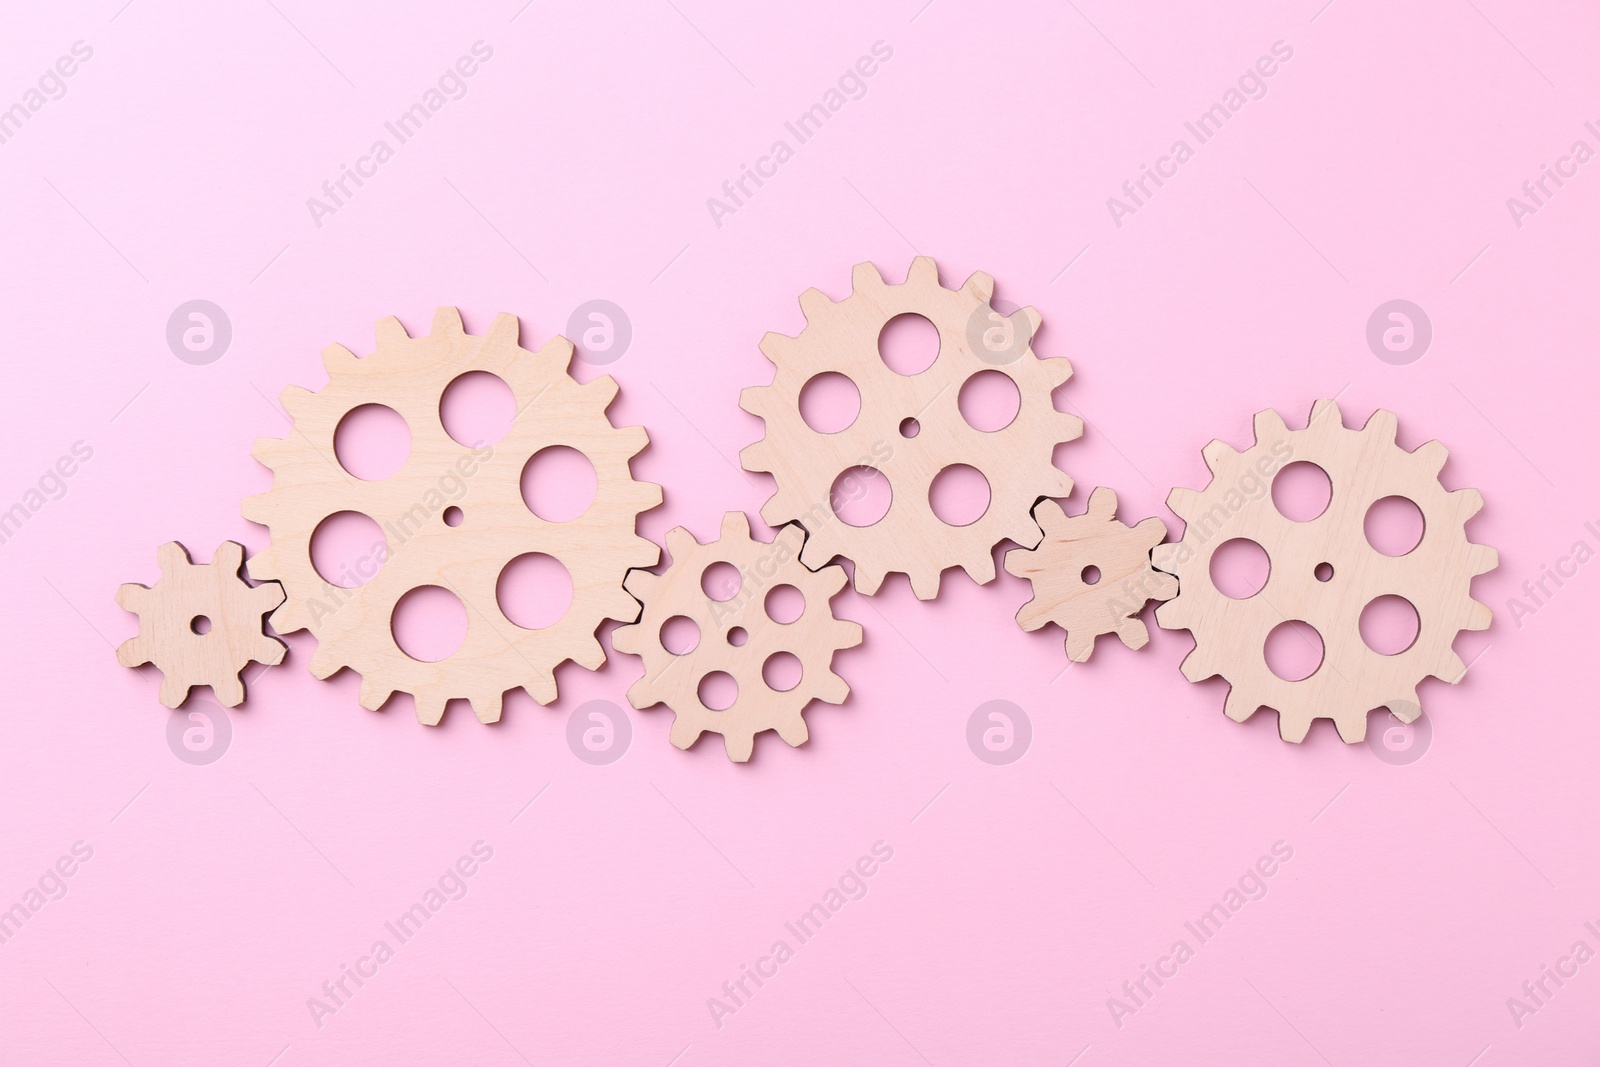 Photo of Business process organization and optimization. Scheme with wooden figures on pink background, top view